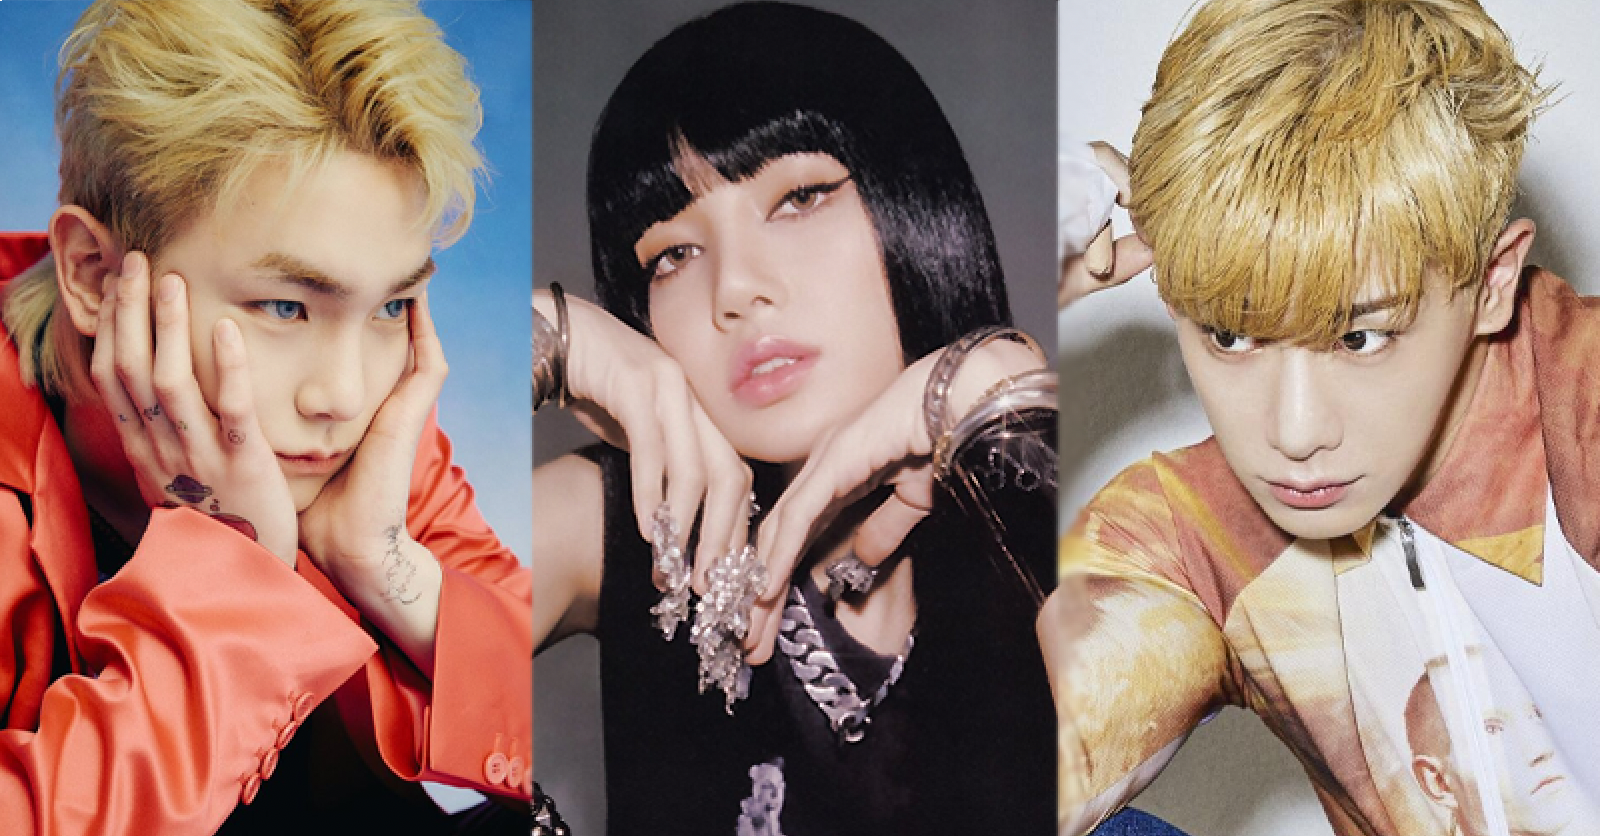 Lisa, Key, Young K & More: Who's The Winner Of This Solo Battle?